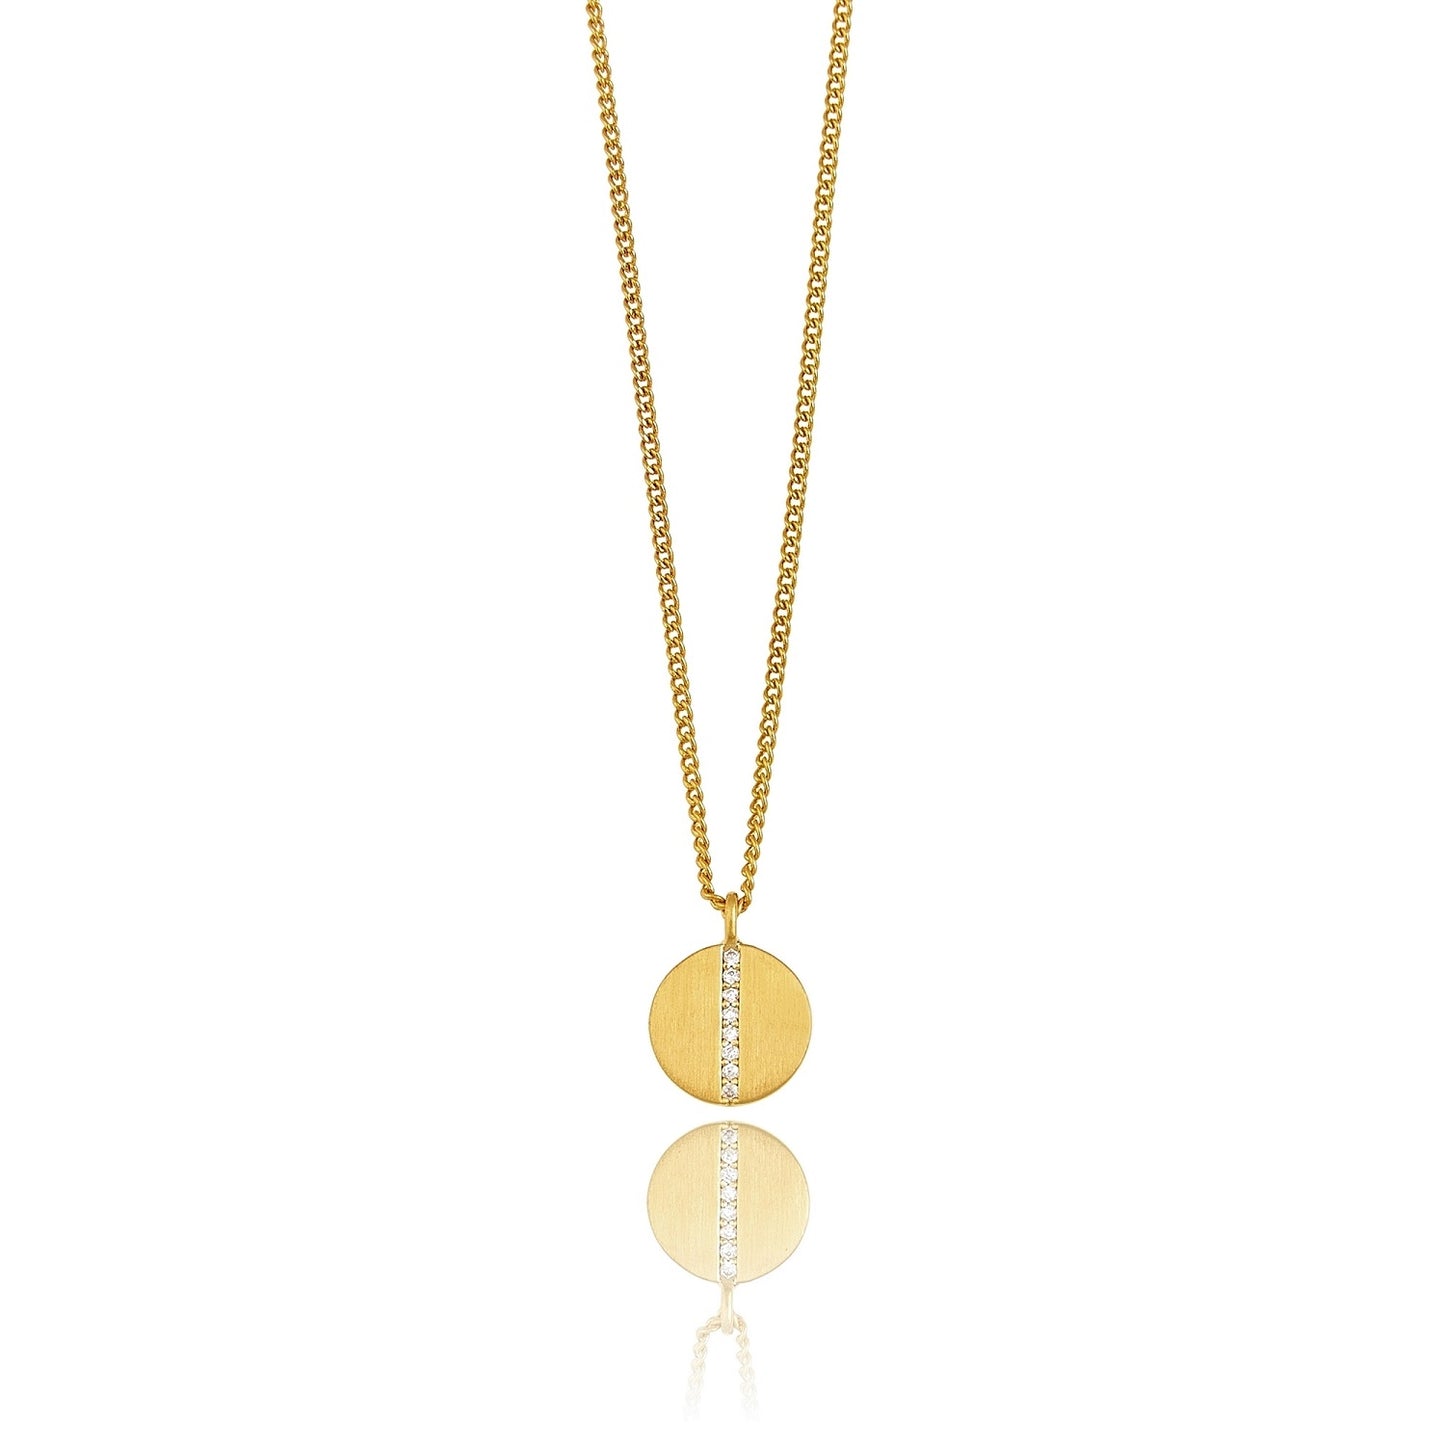 LADY GOLD NECKLACE